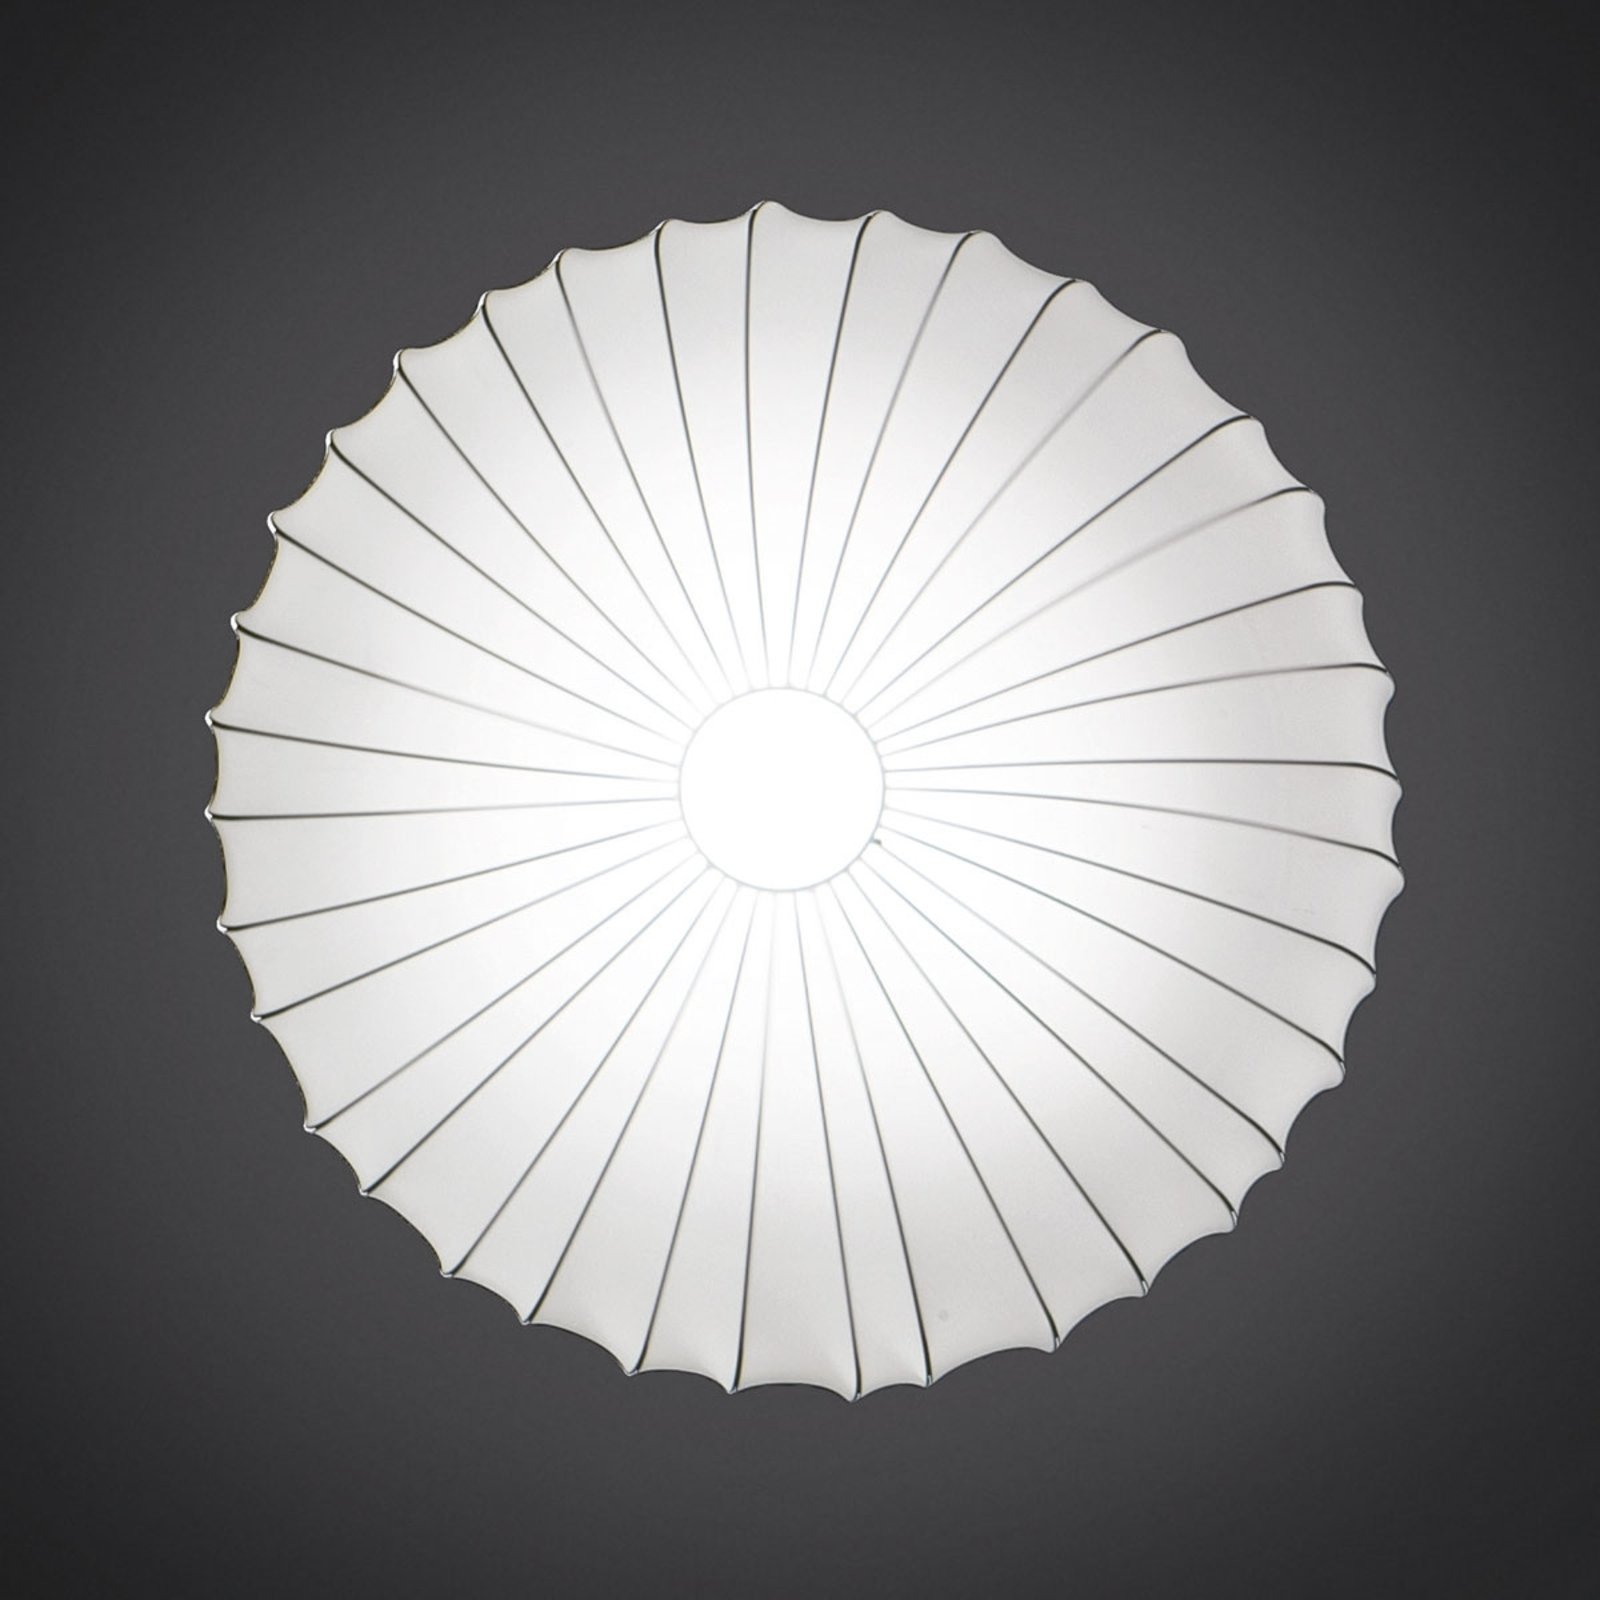 Axolight Muse wall light in white